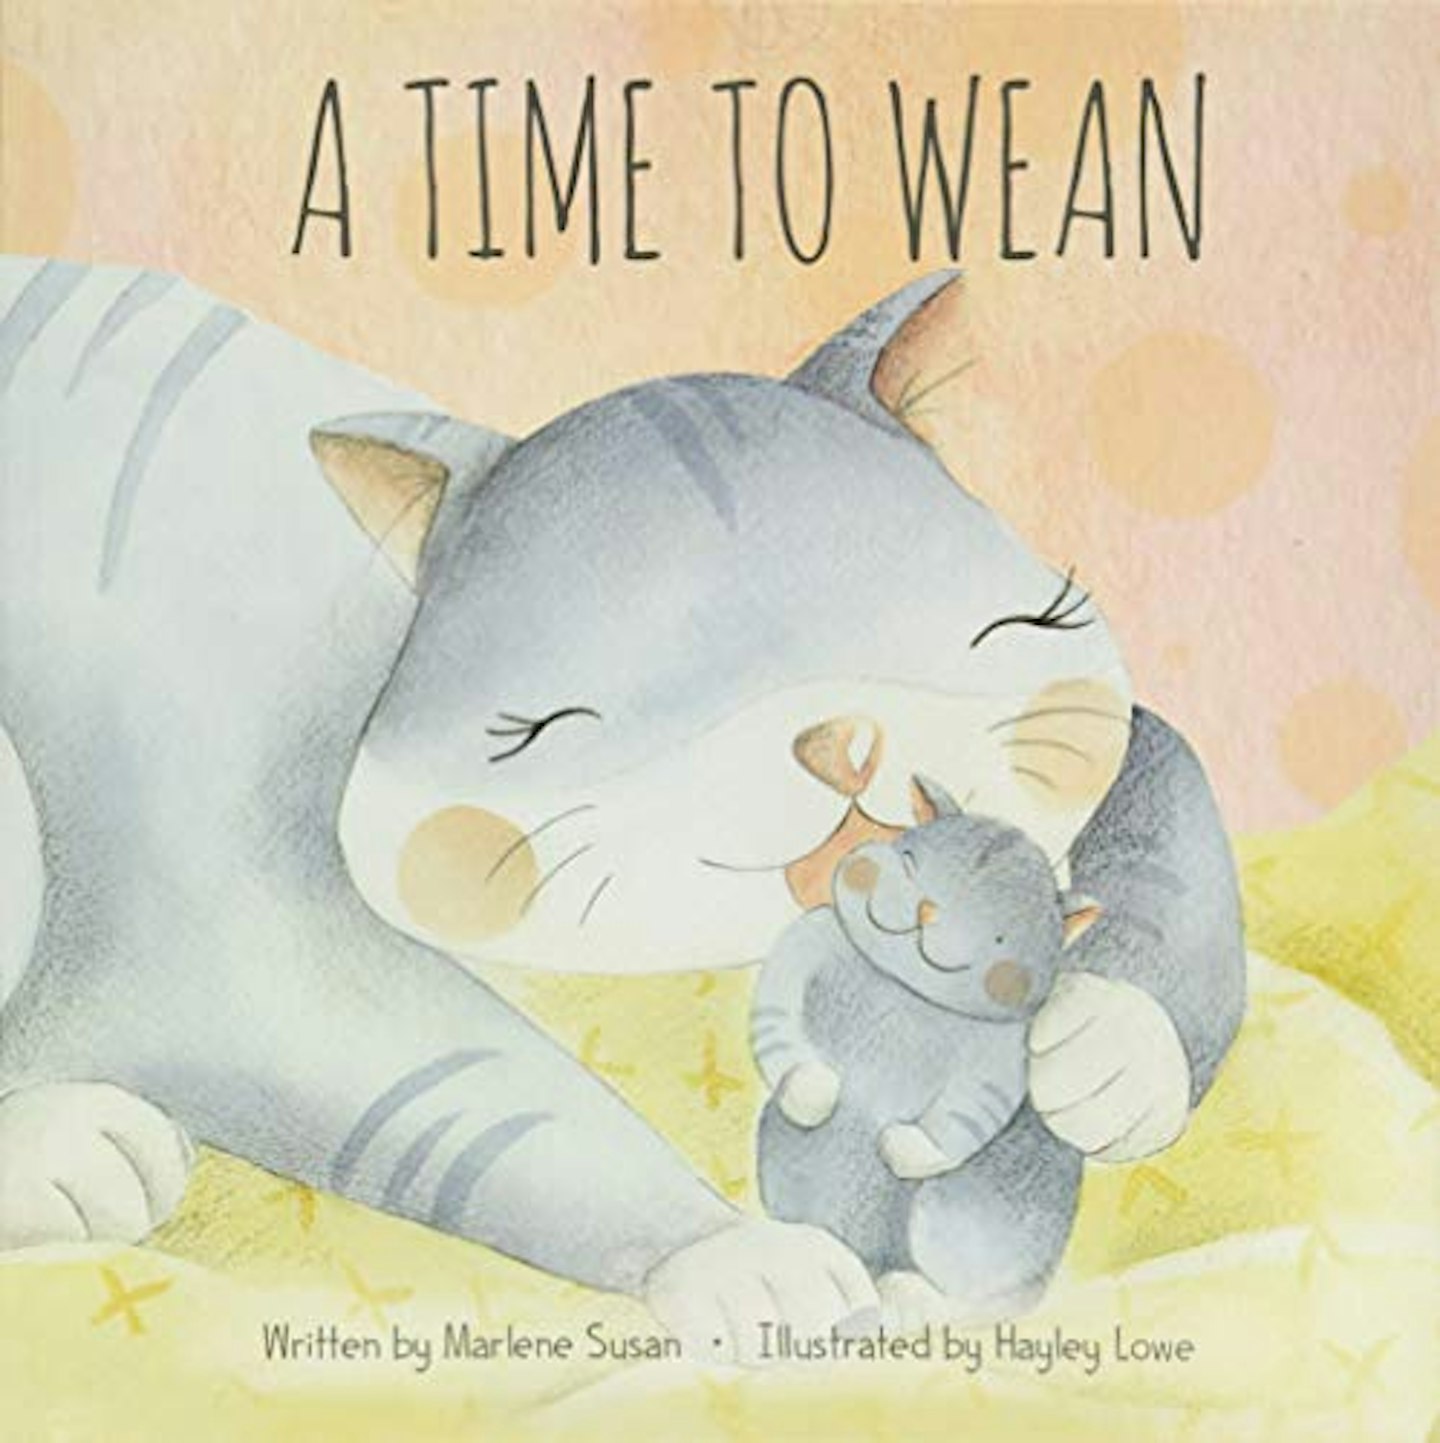 A Time to Wean by Marlene Susan